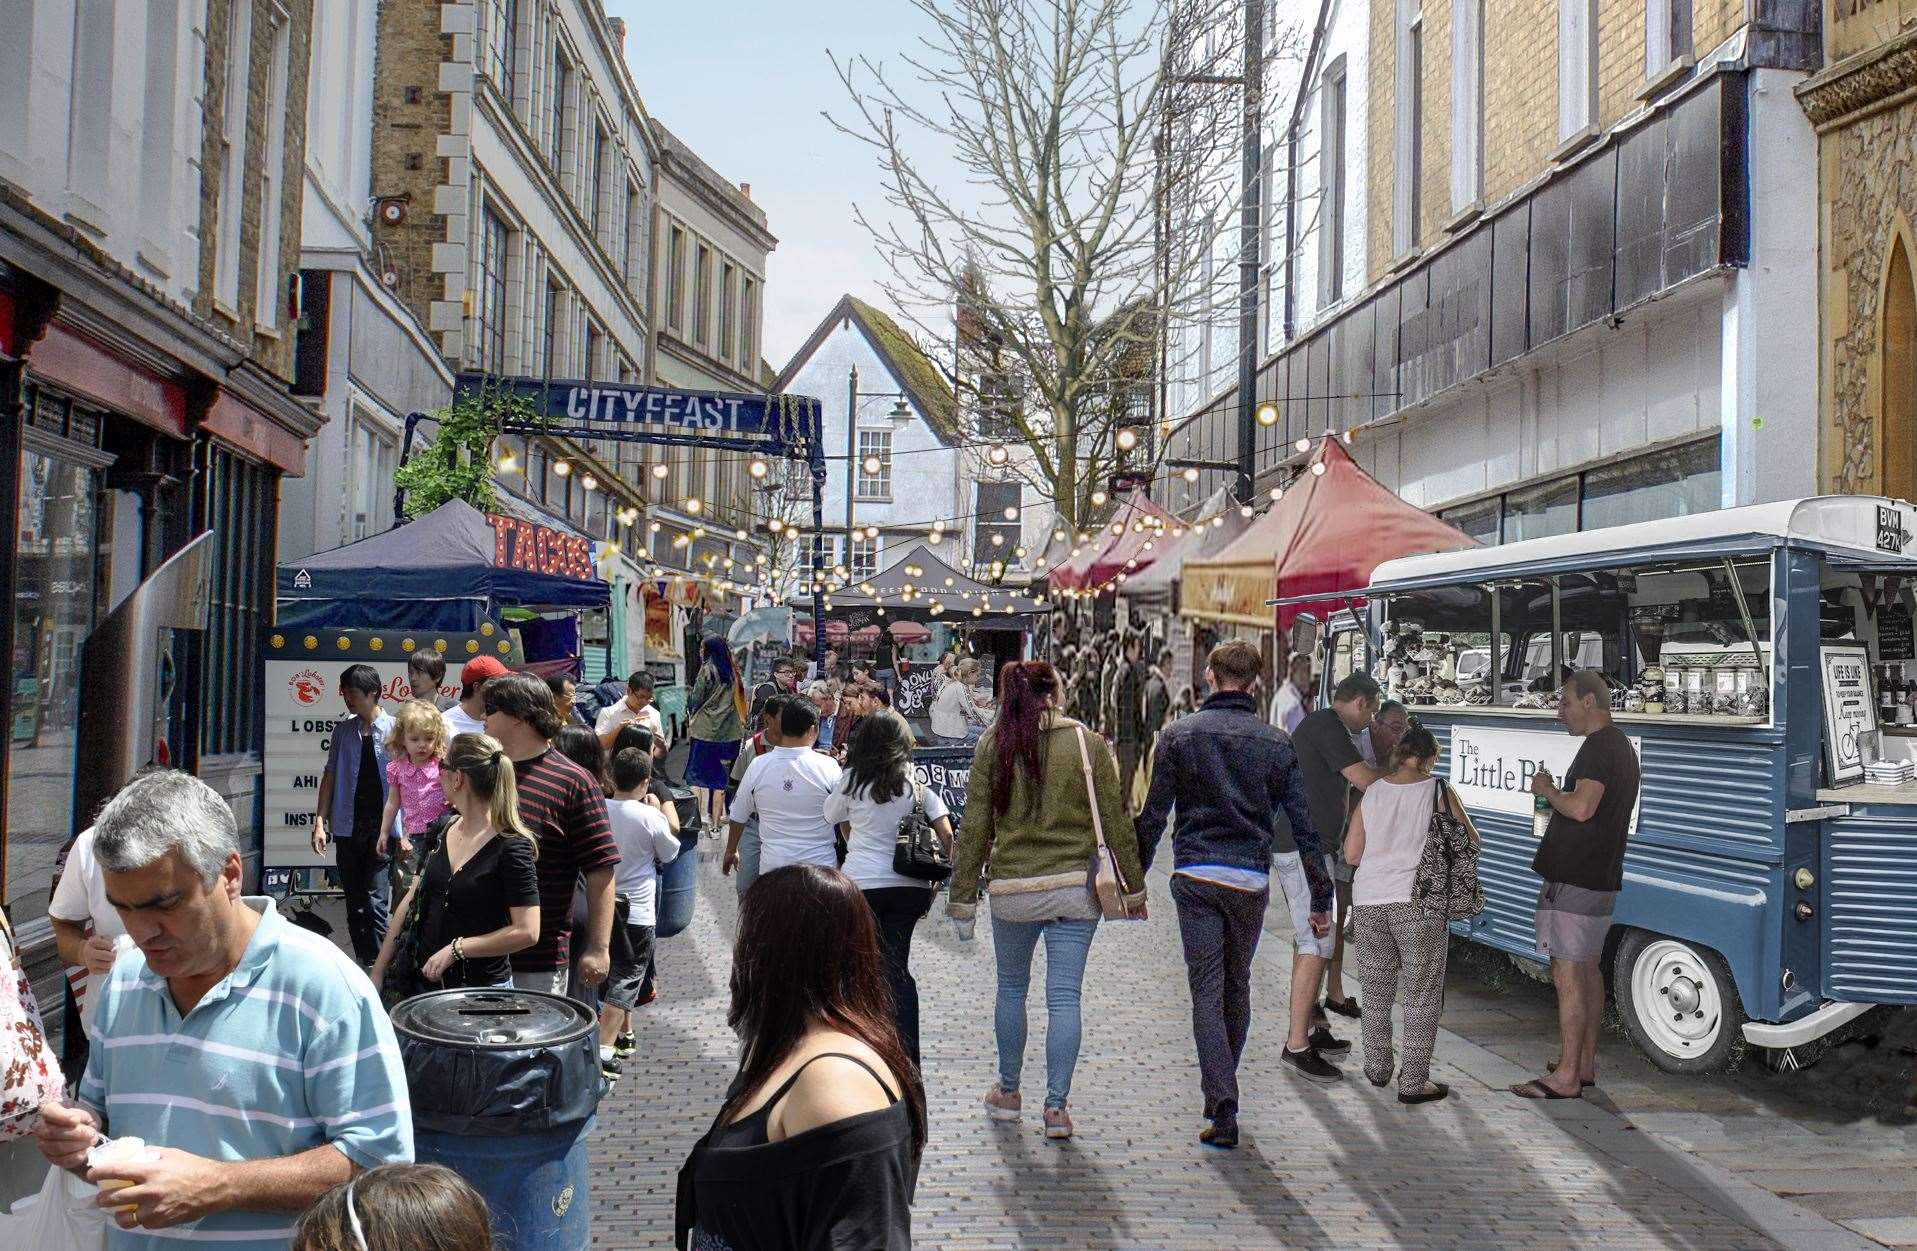 How the street food market in Guildhall Street could look by day Picture: City Feast